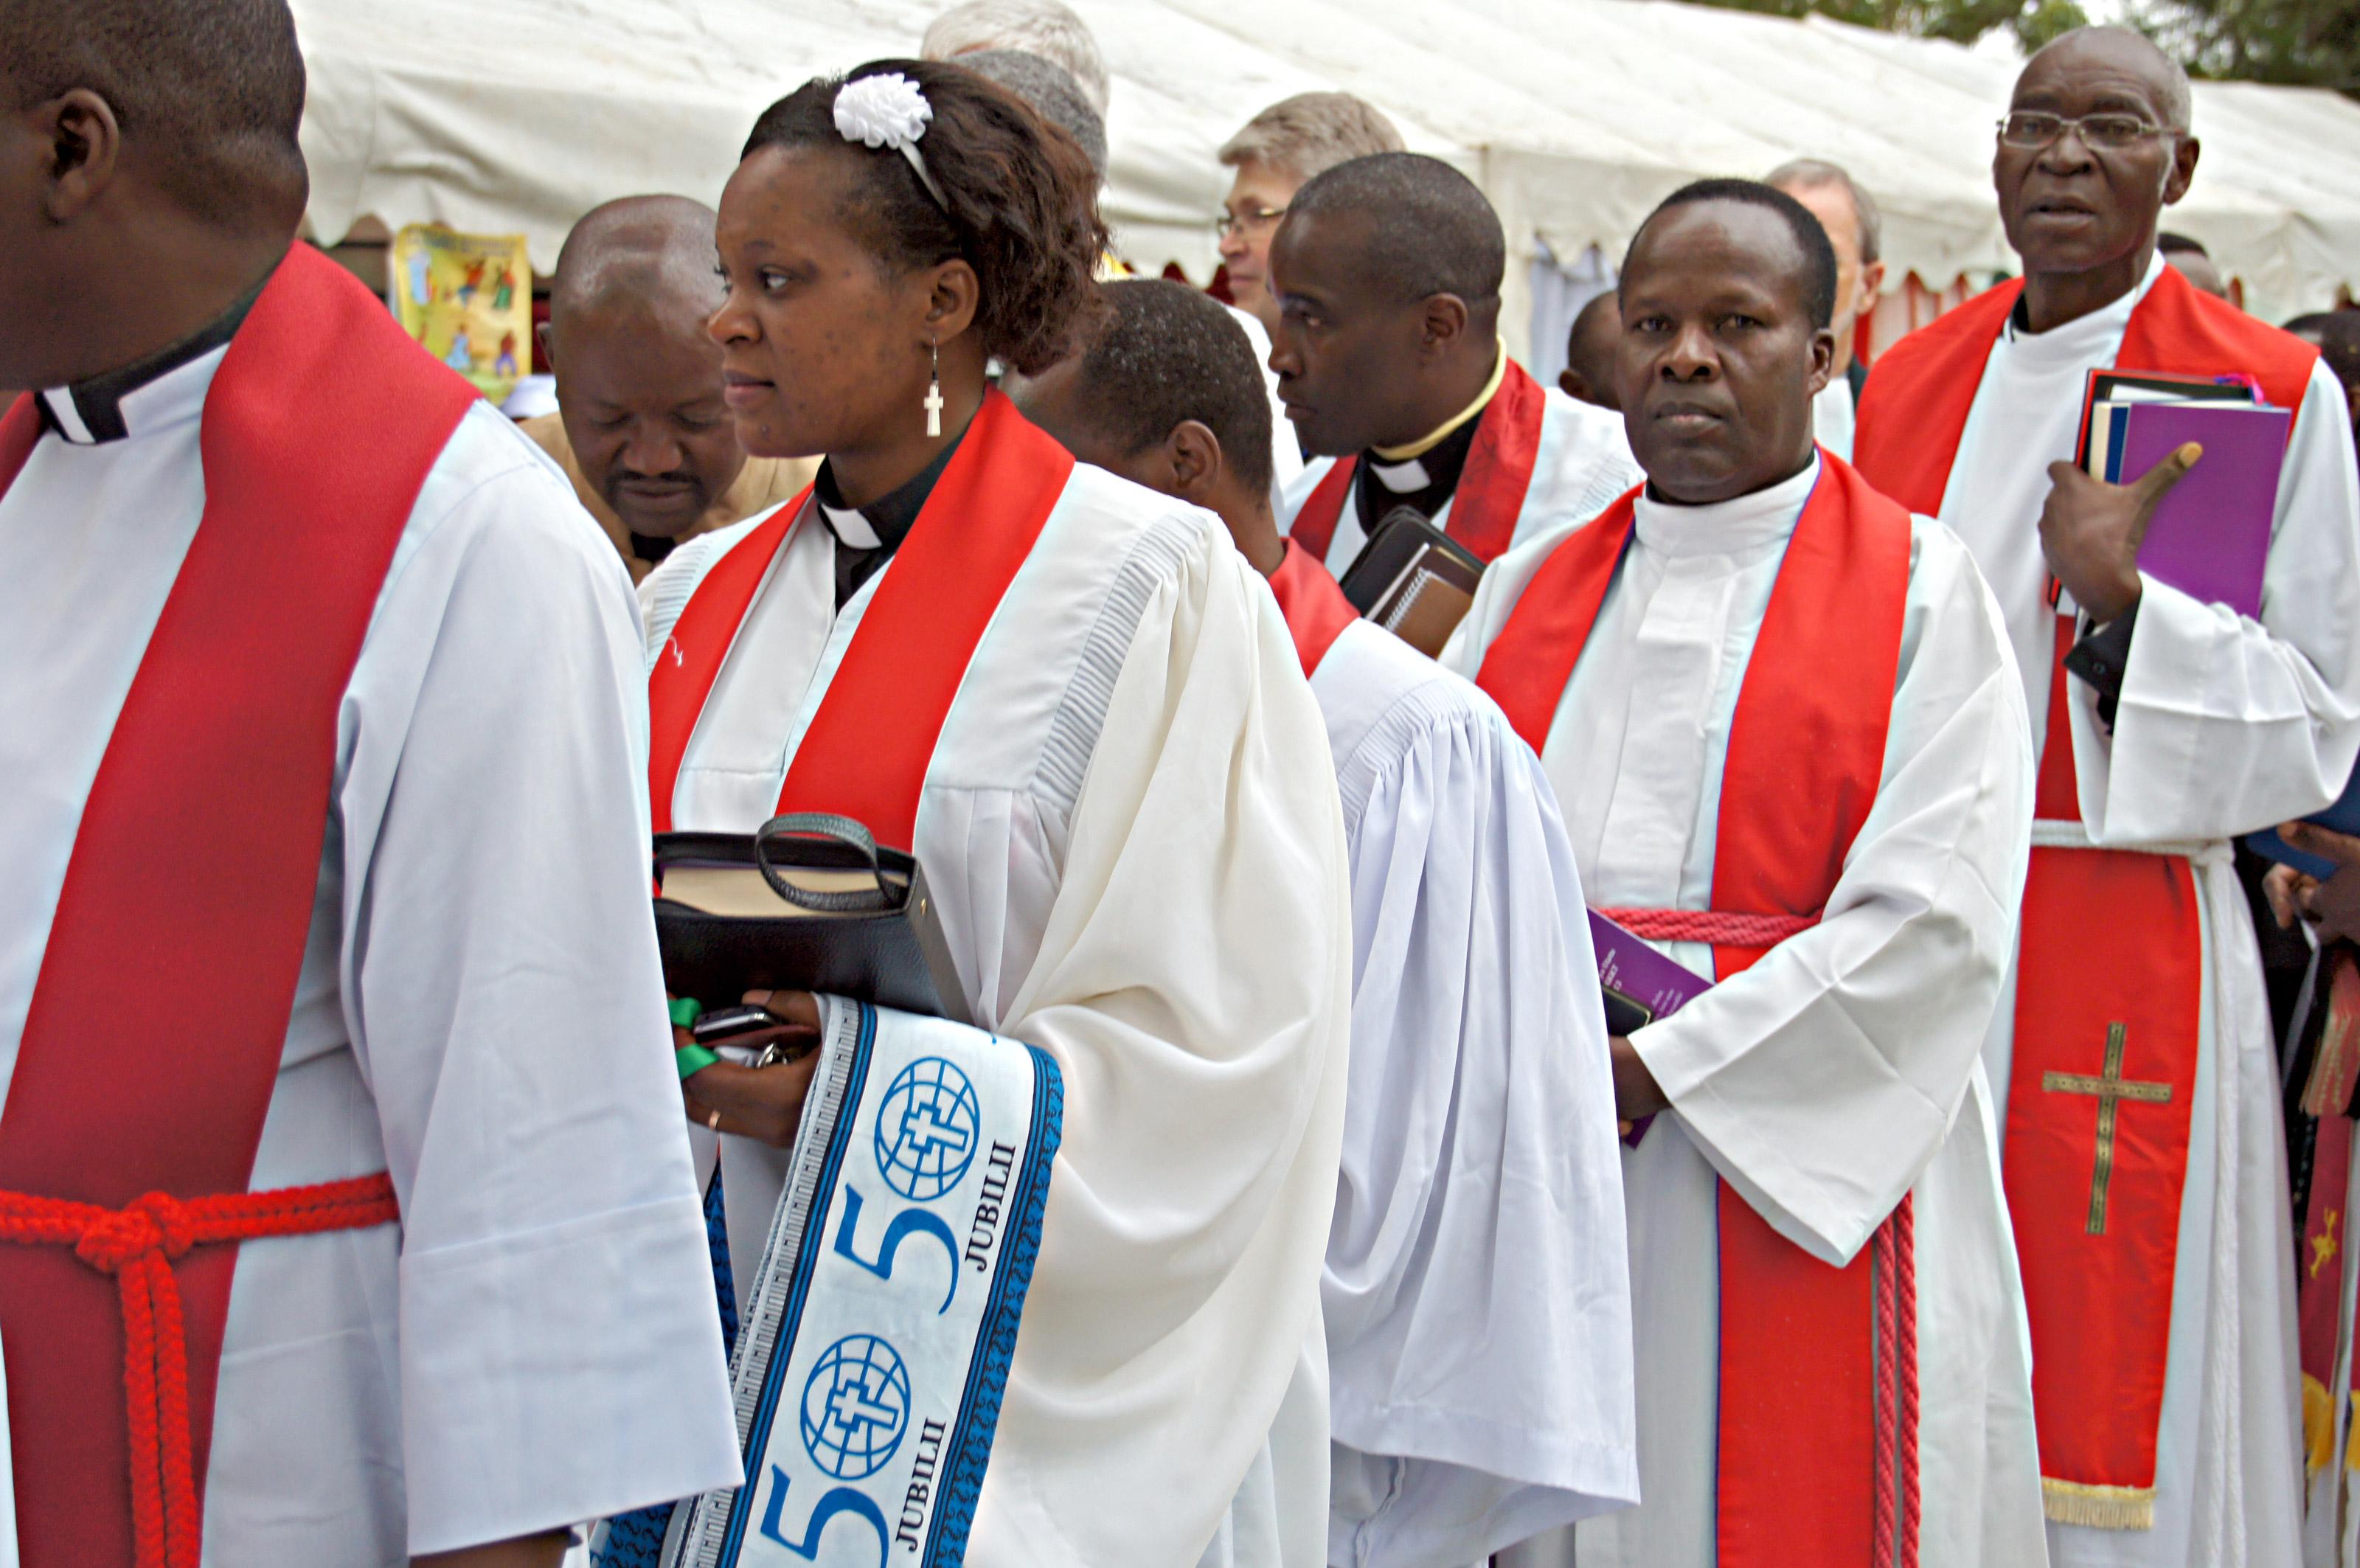 Pastors from the ELCT prepare for the procession preceding the worship service to mark the 50th anniversary of the church. Â© LWF/H. Martinussen